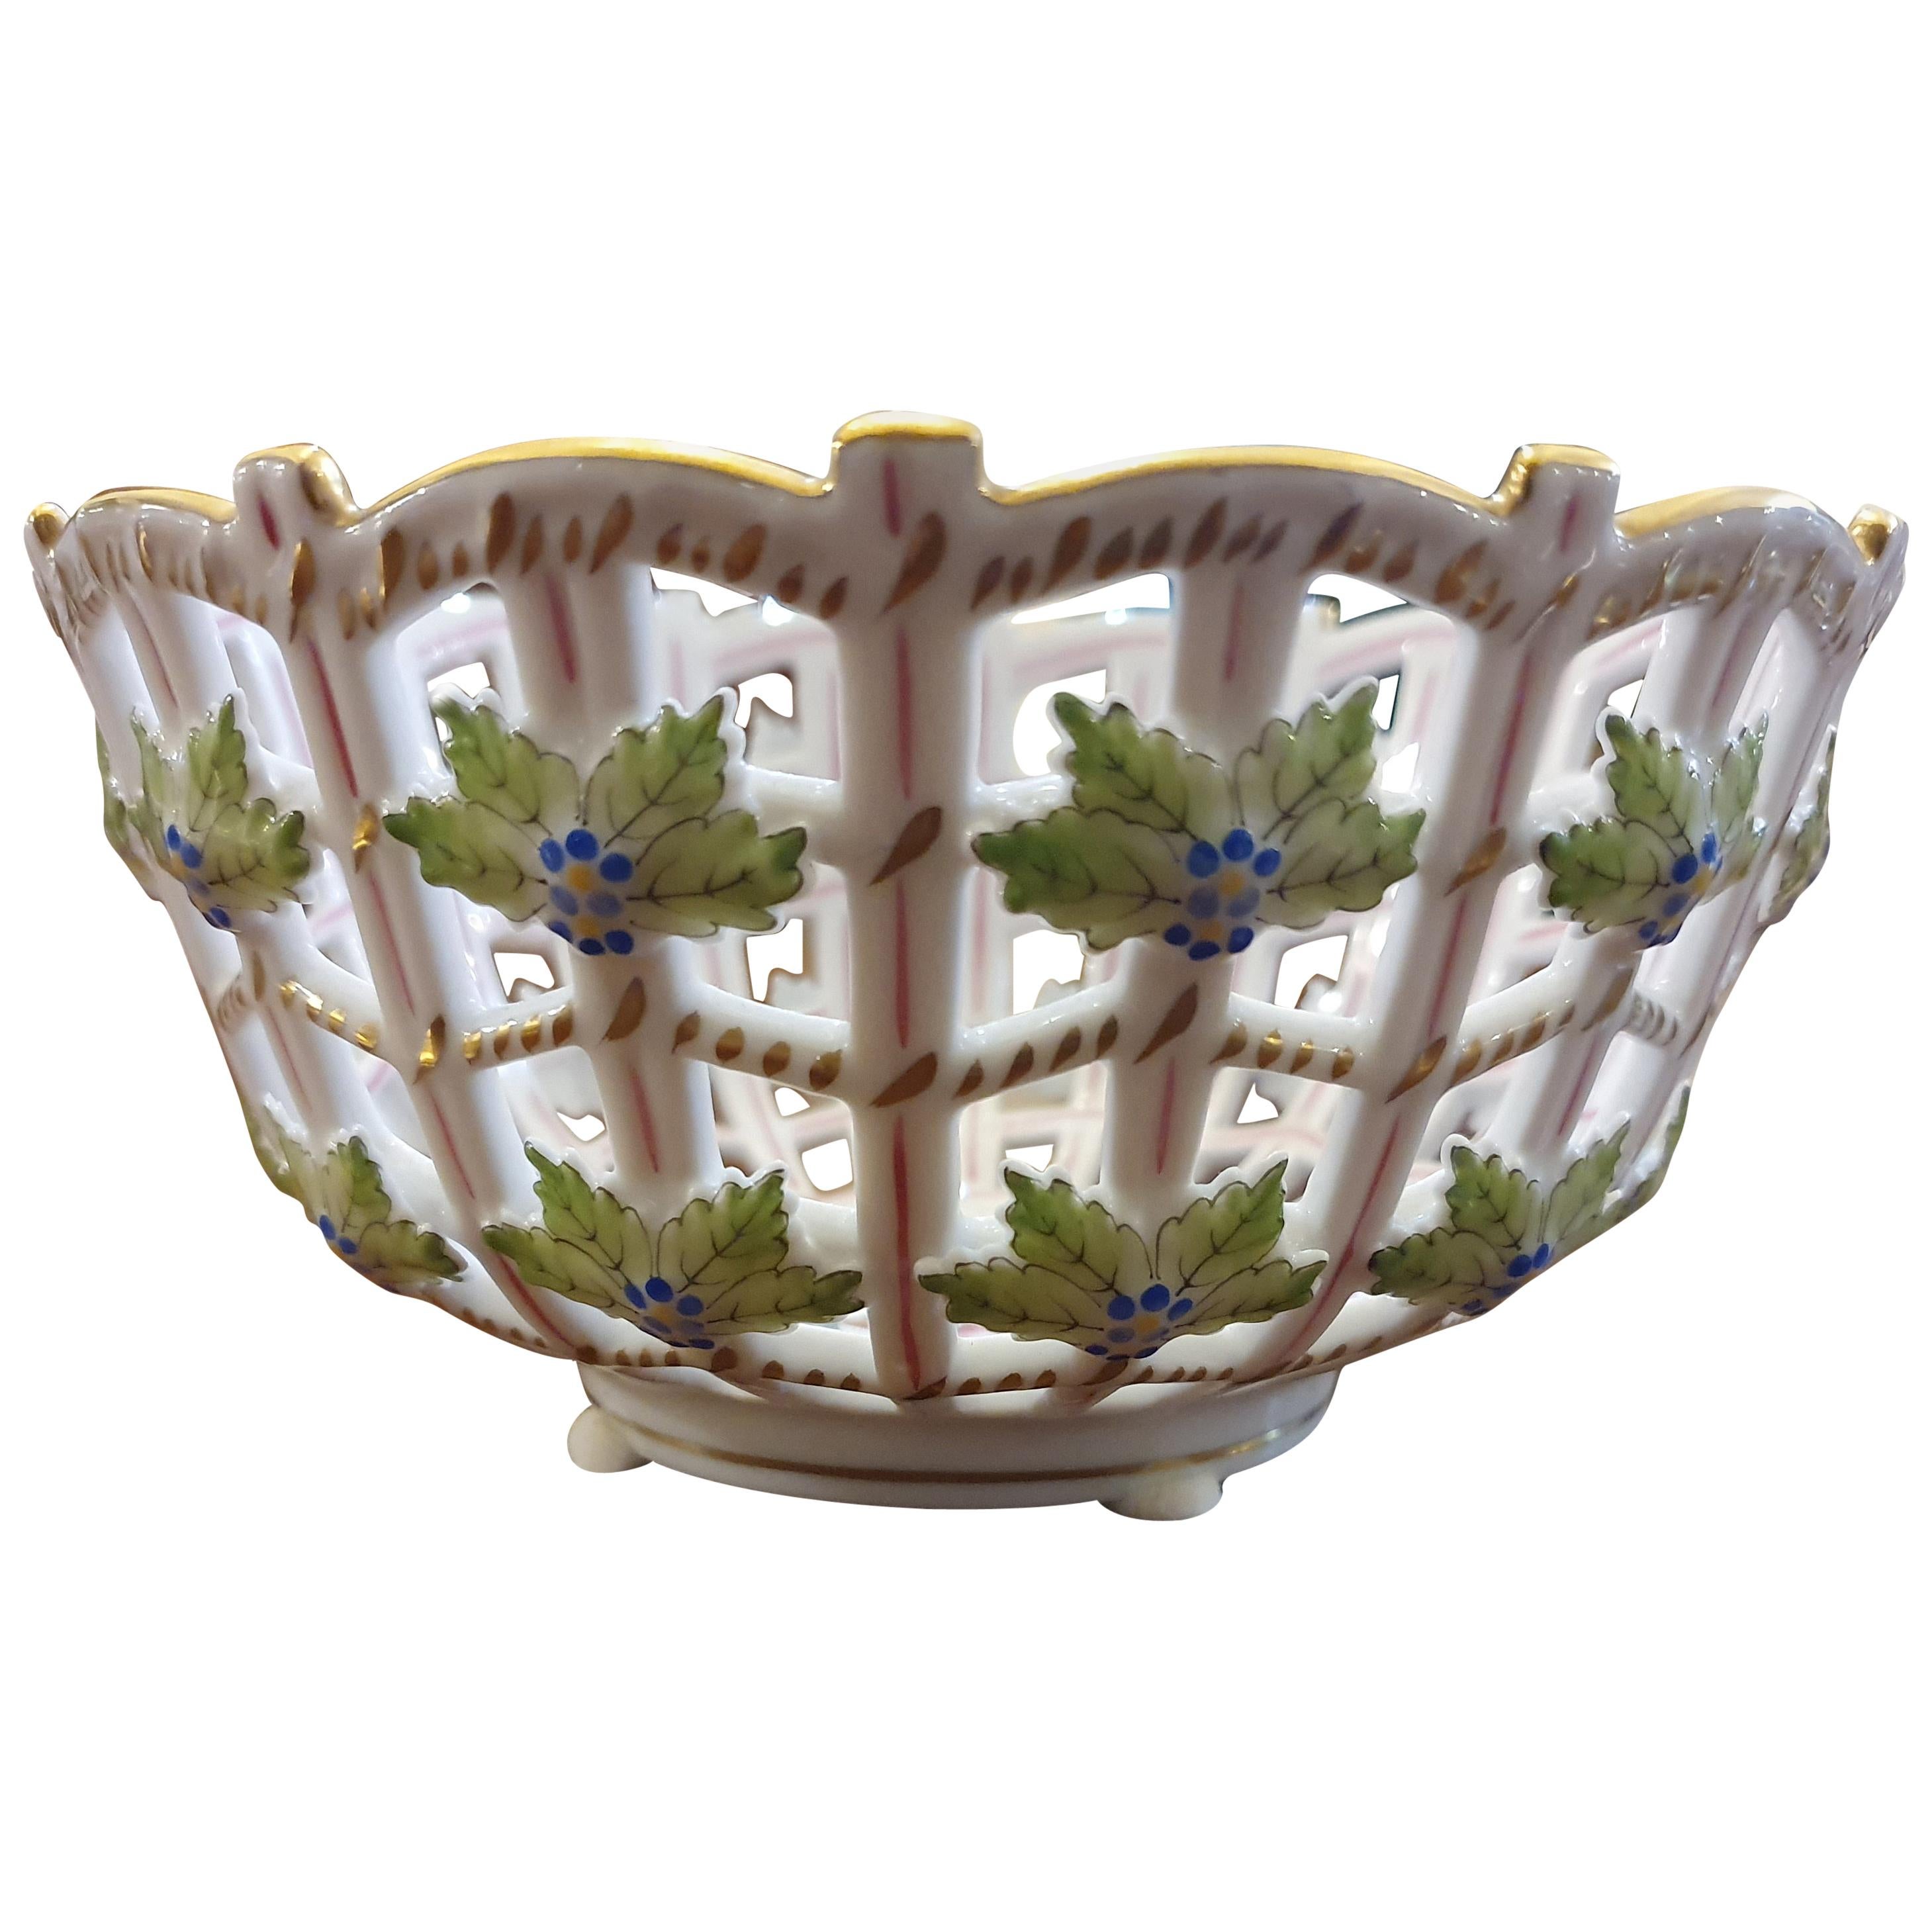 Herend "Victoria " Hand Painted Porcelain Basket, Hungary, Modern